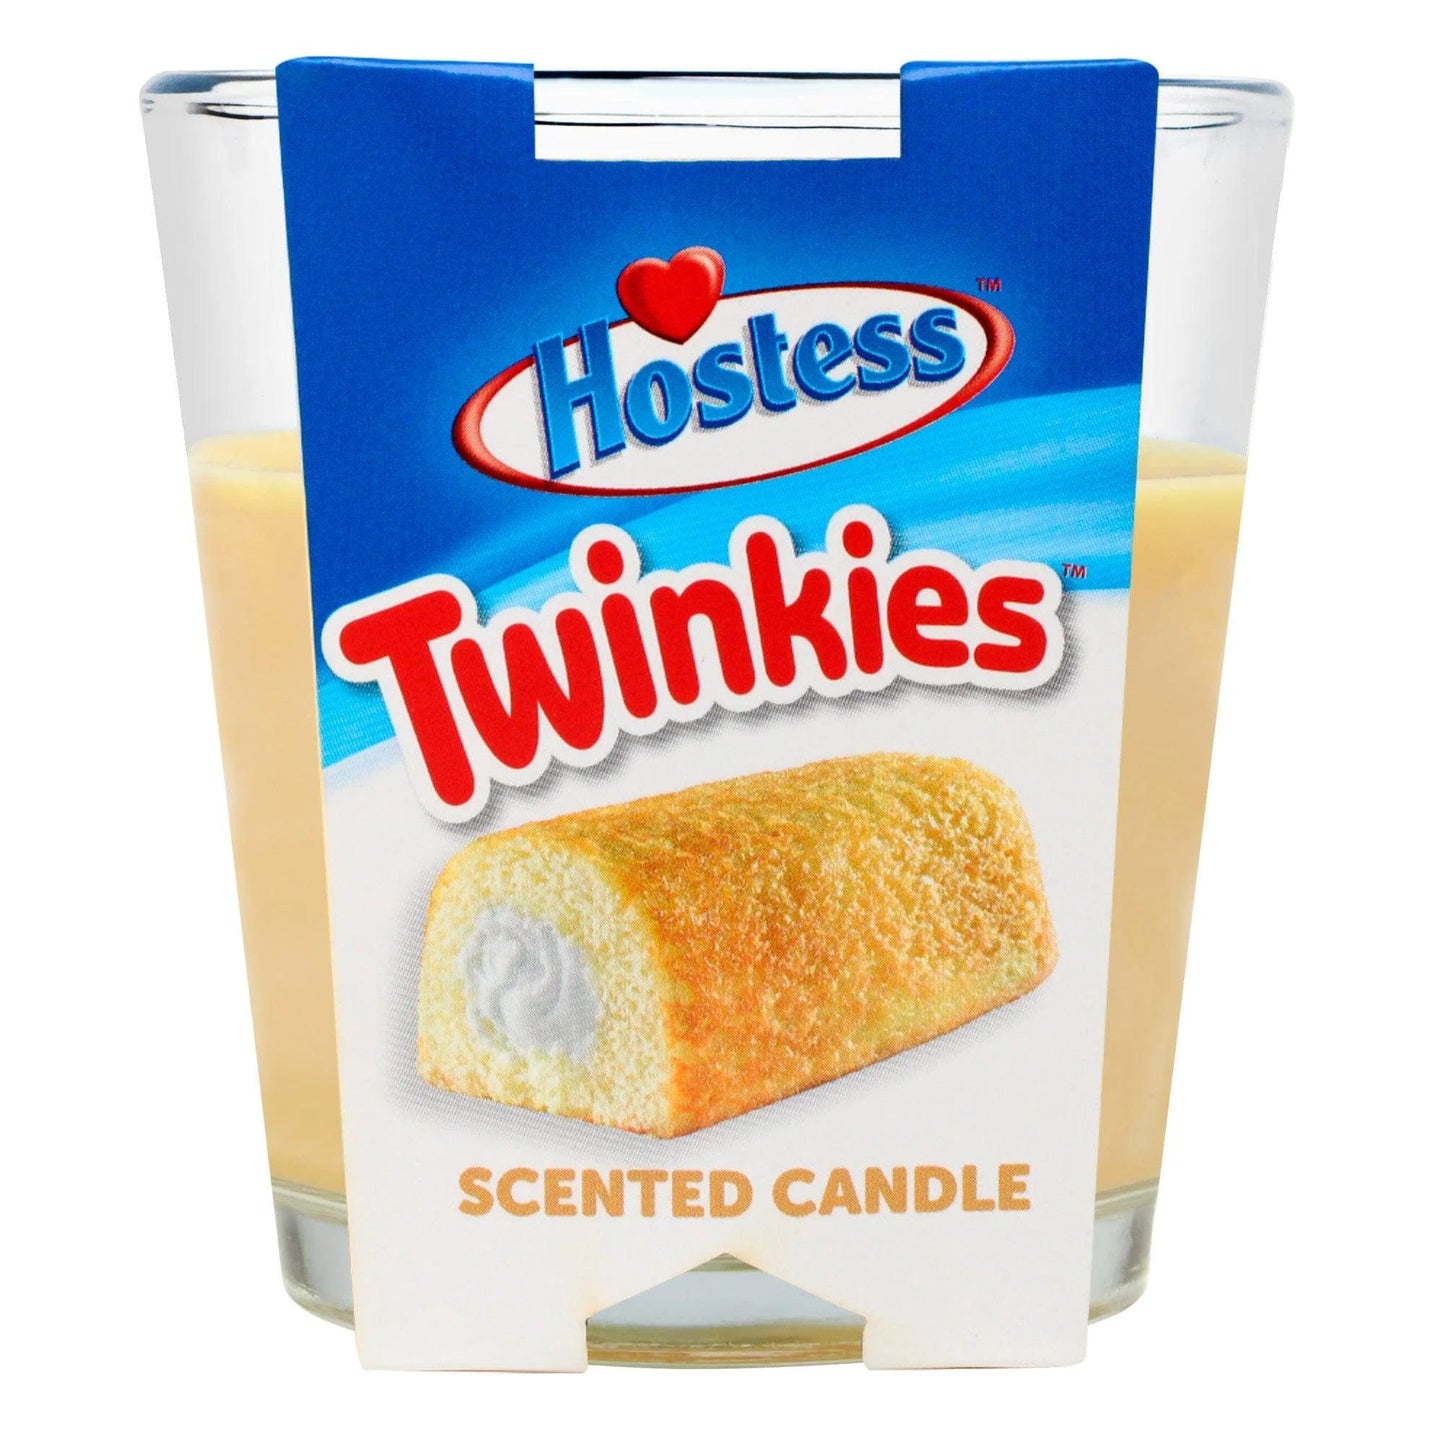 Sweet Tooth Candles Hostess Twinkie 3oz Candy Scented Candles